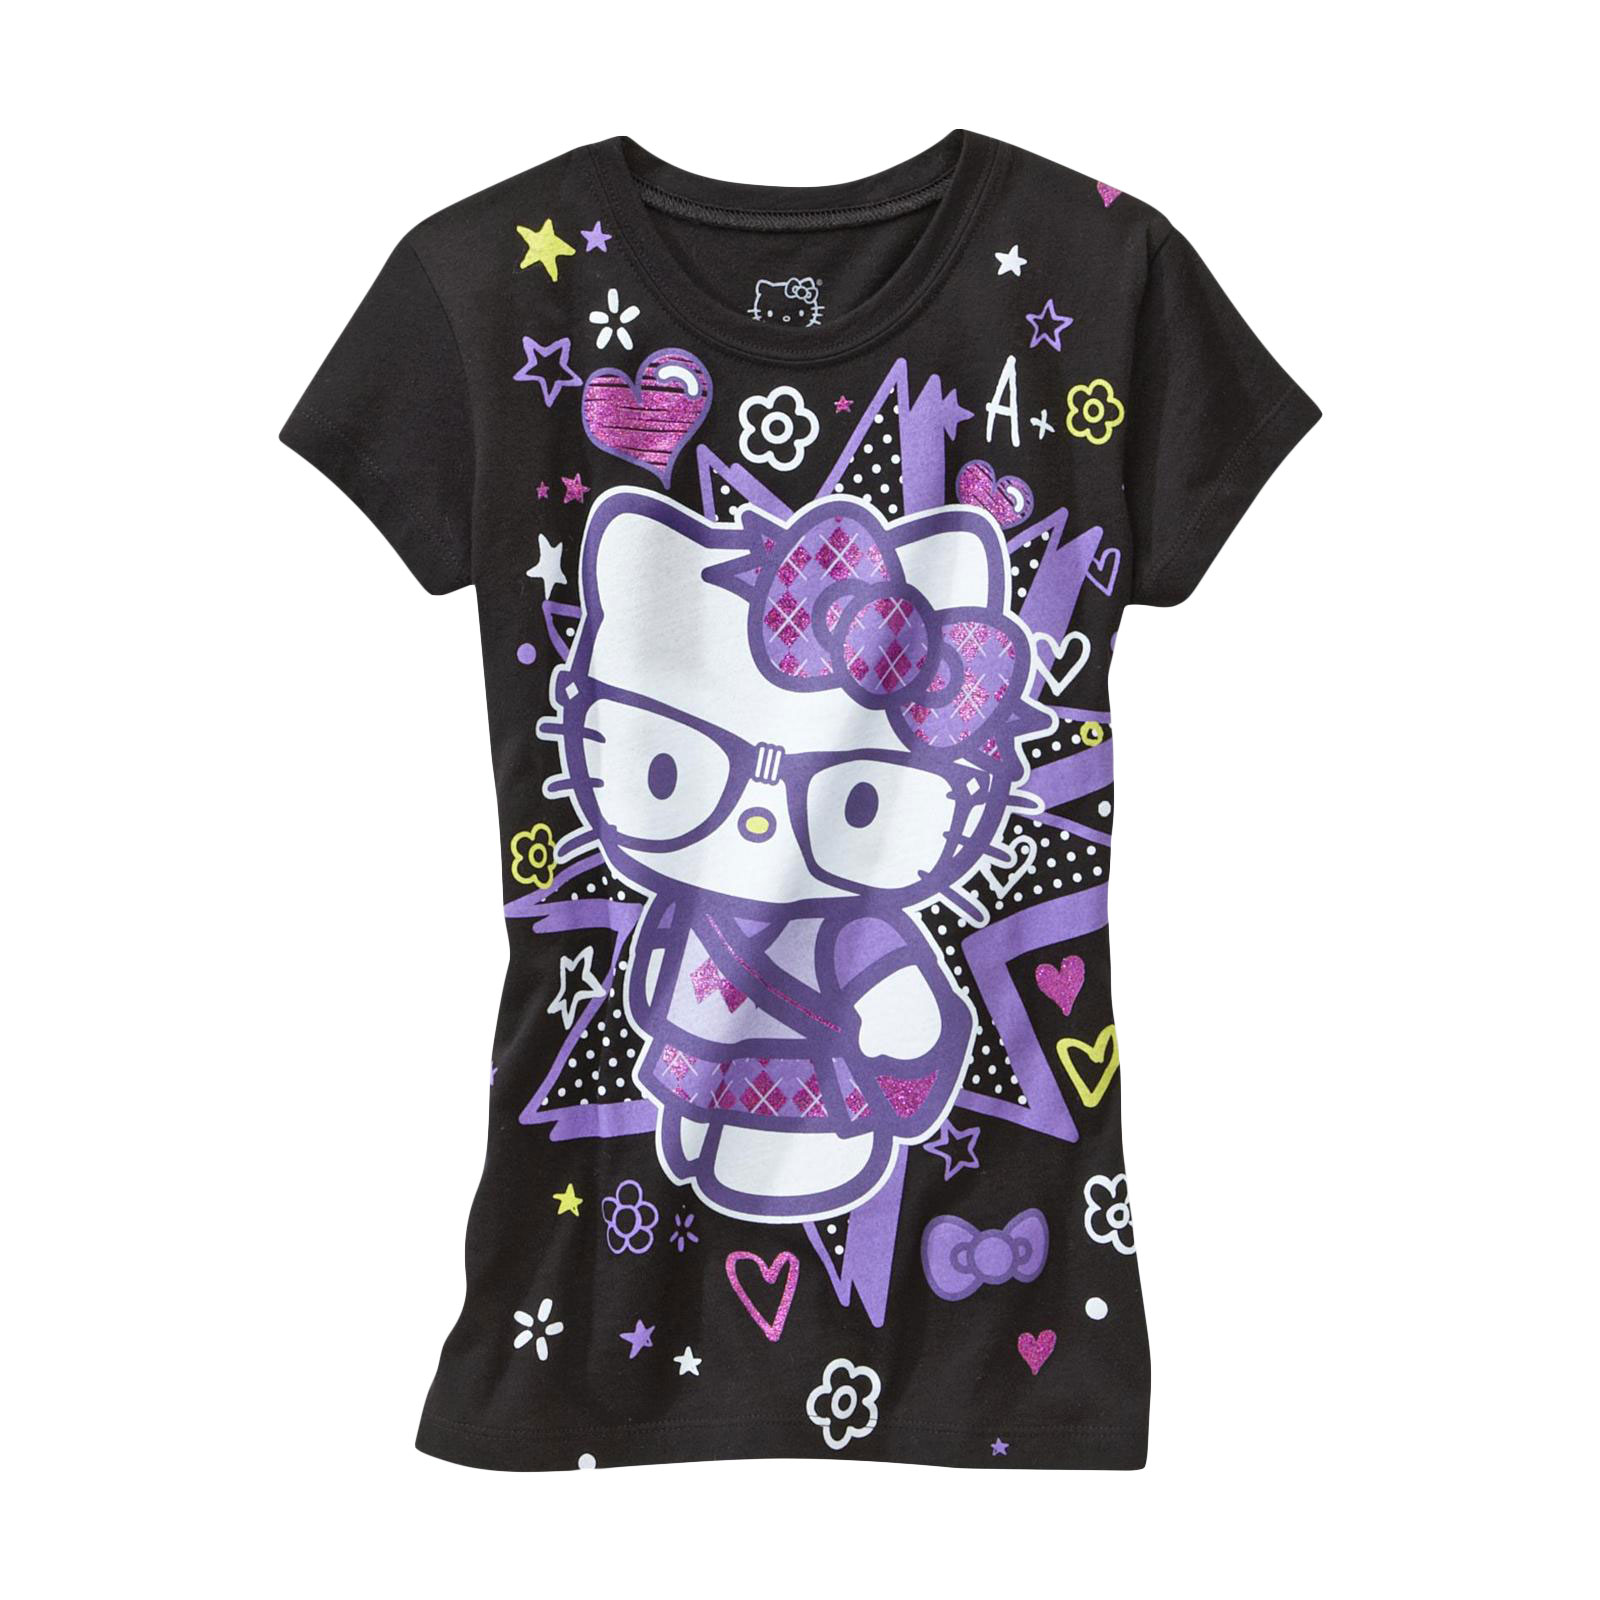 Hello Kitty Girl's Graphic T-Shirt - Back To School